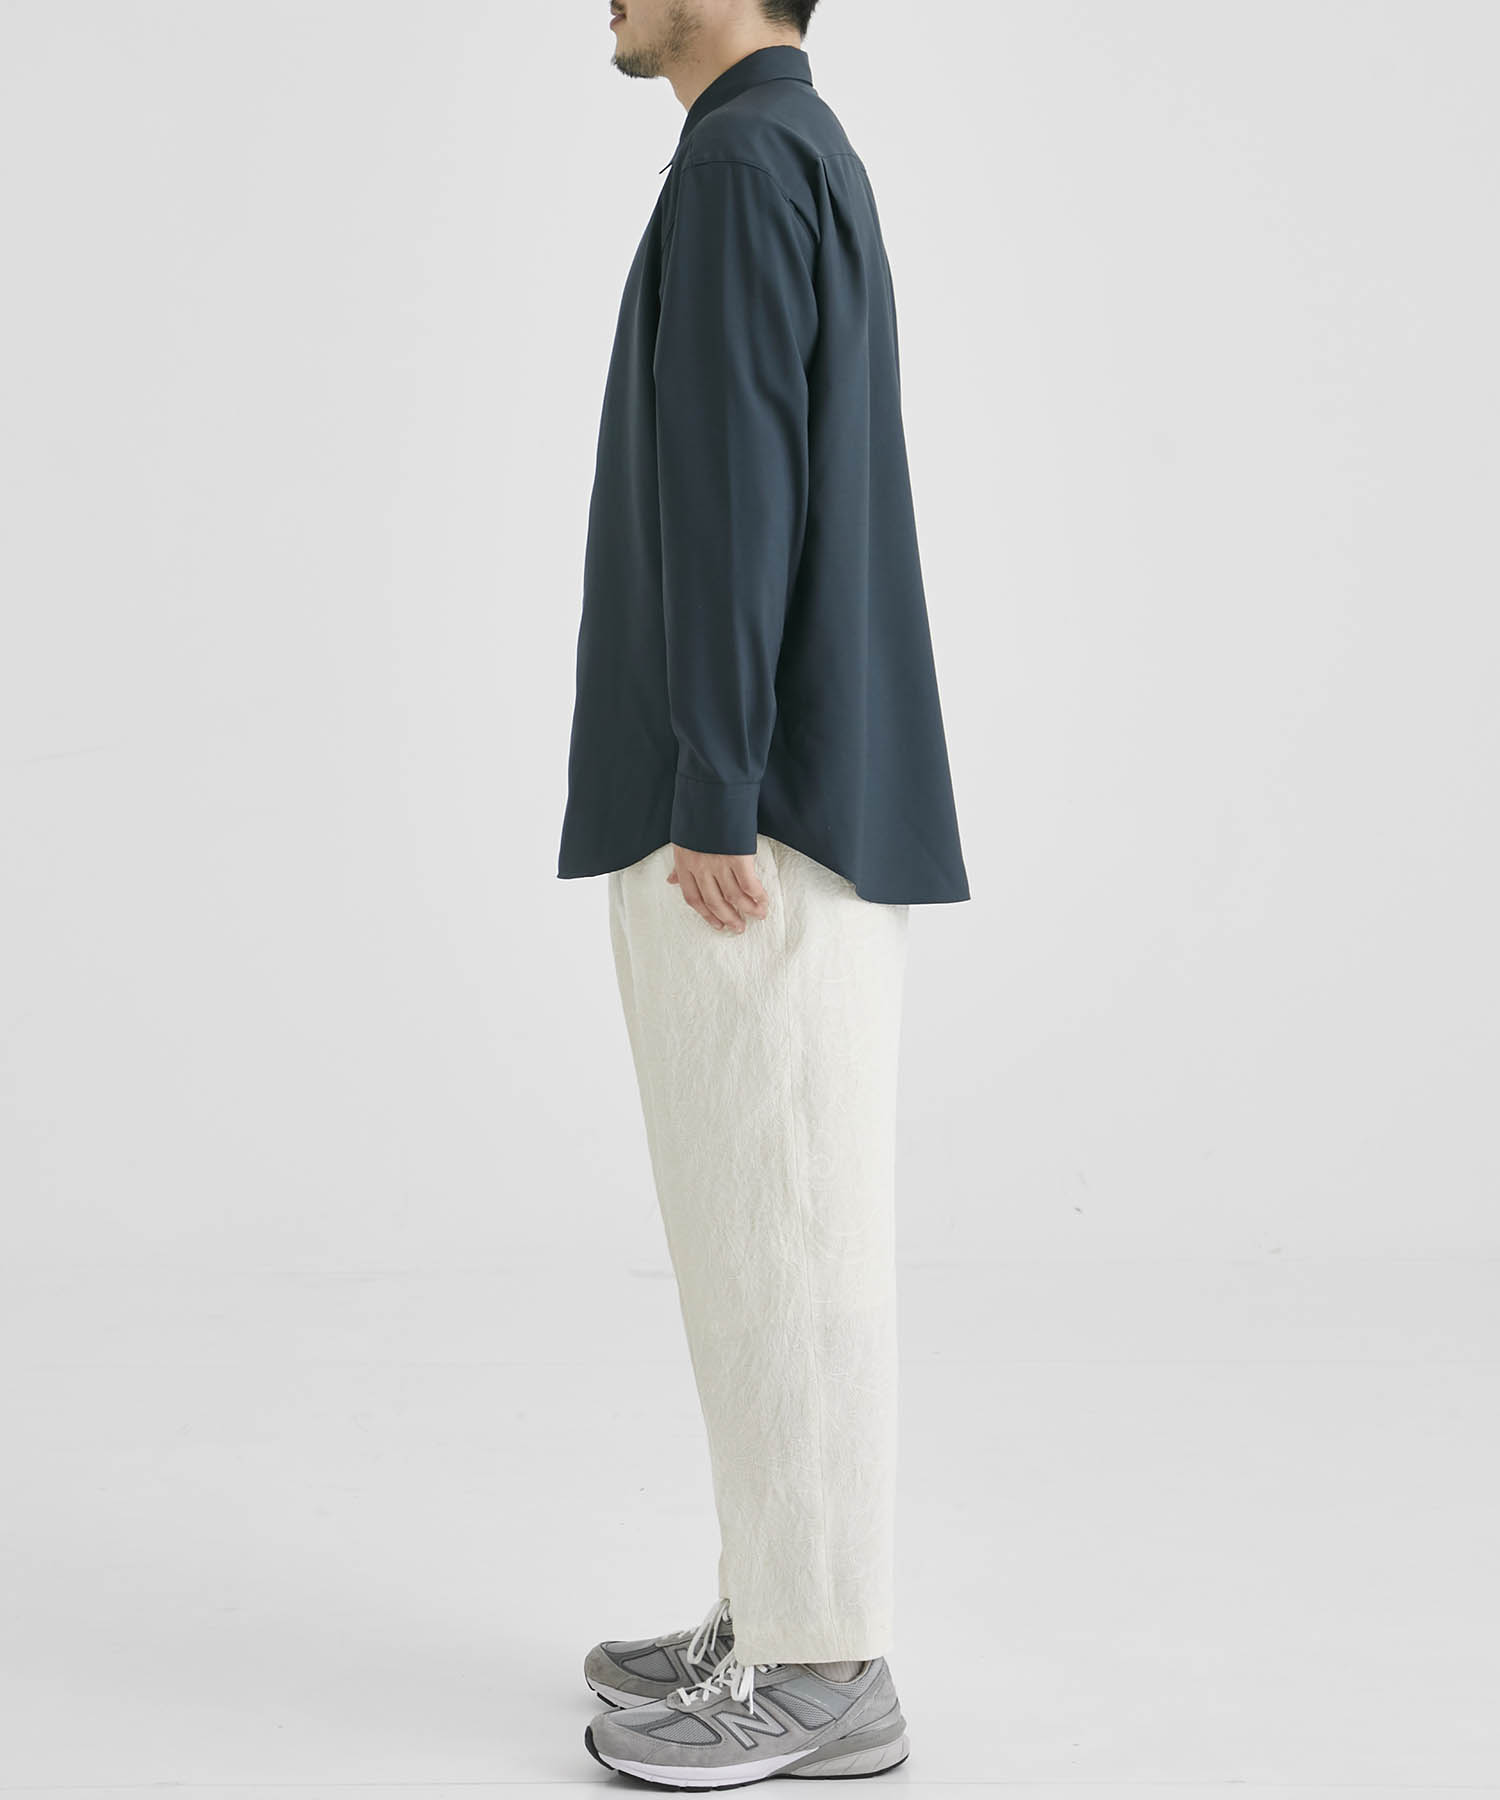 DROPPED SHOULDER TOP WITH SHIRT COLLAR IN WOOL SHIRTING OVERCOAT